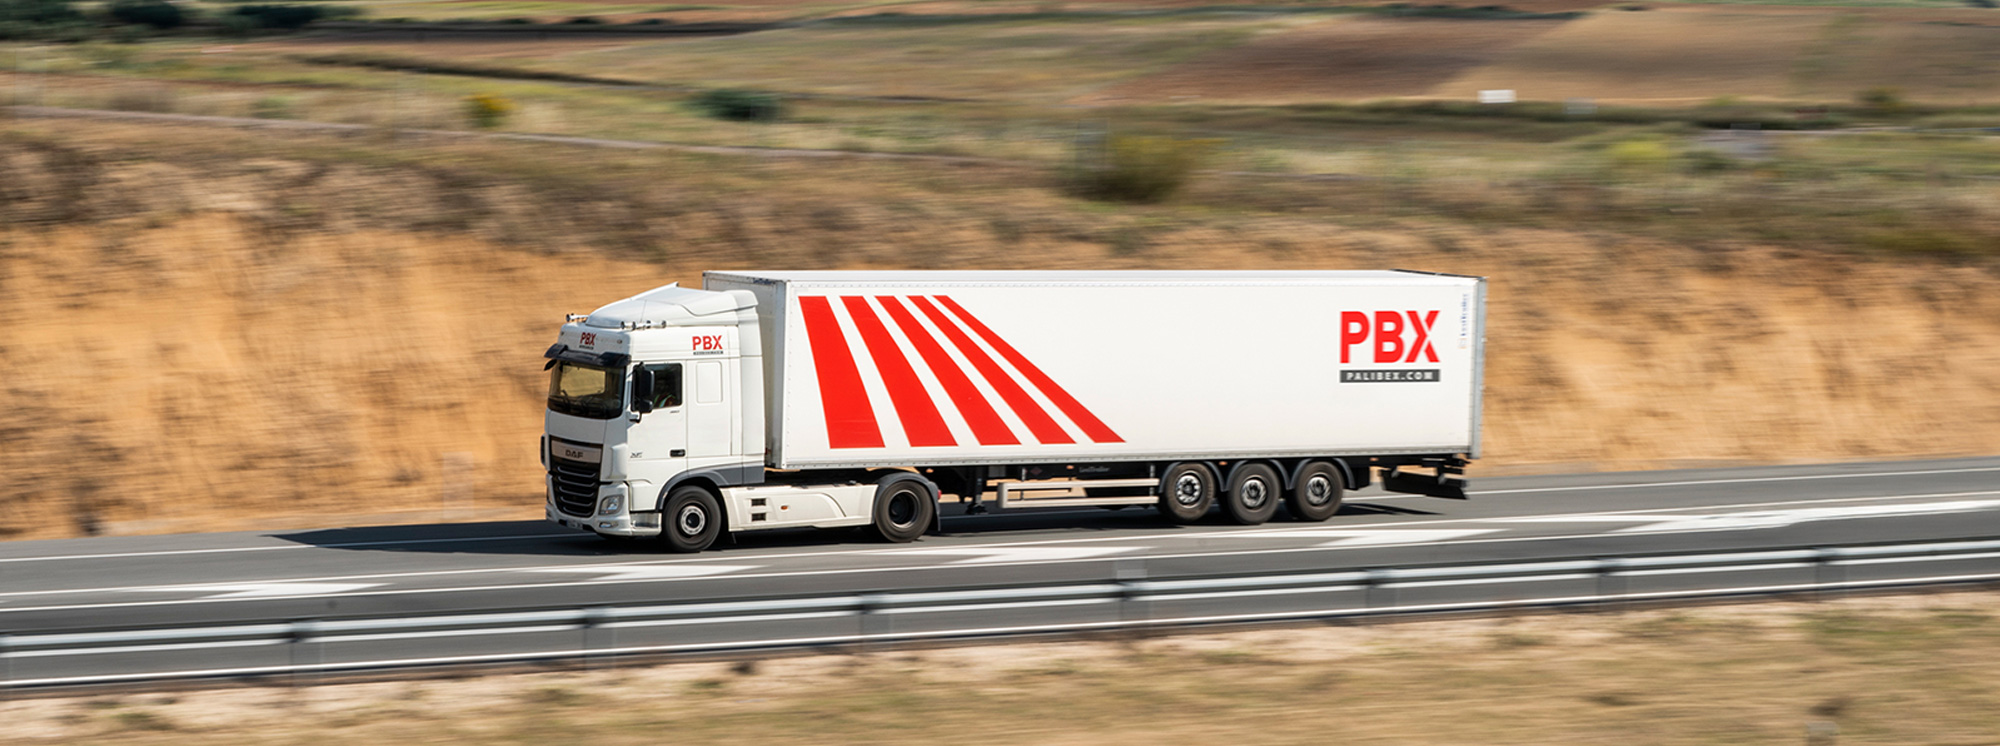 Pallet transport solutions in Spain - palibex